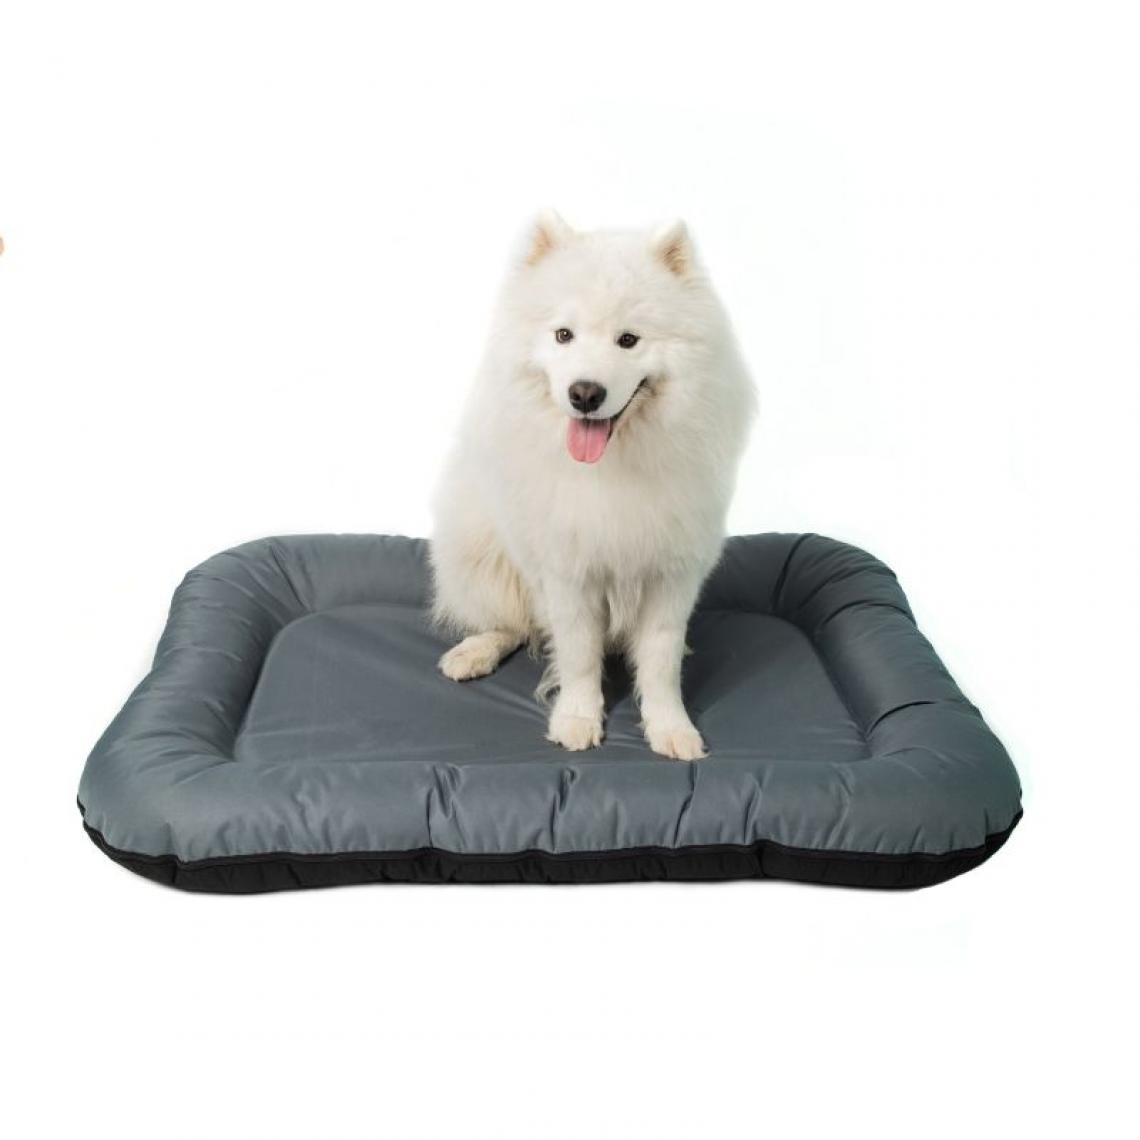 Wiko - Inflatable boat Gra?yna Dog bed - size XL - Corbeille pour chien